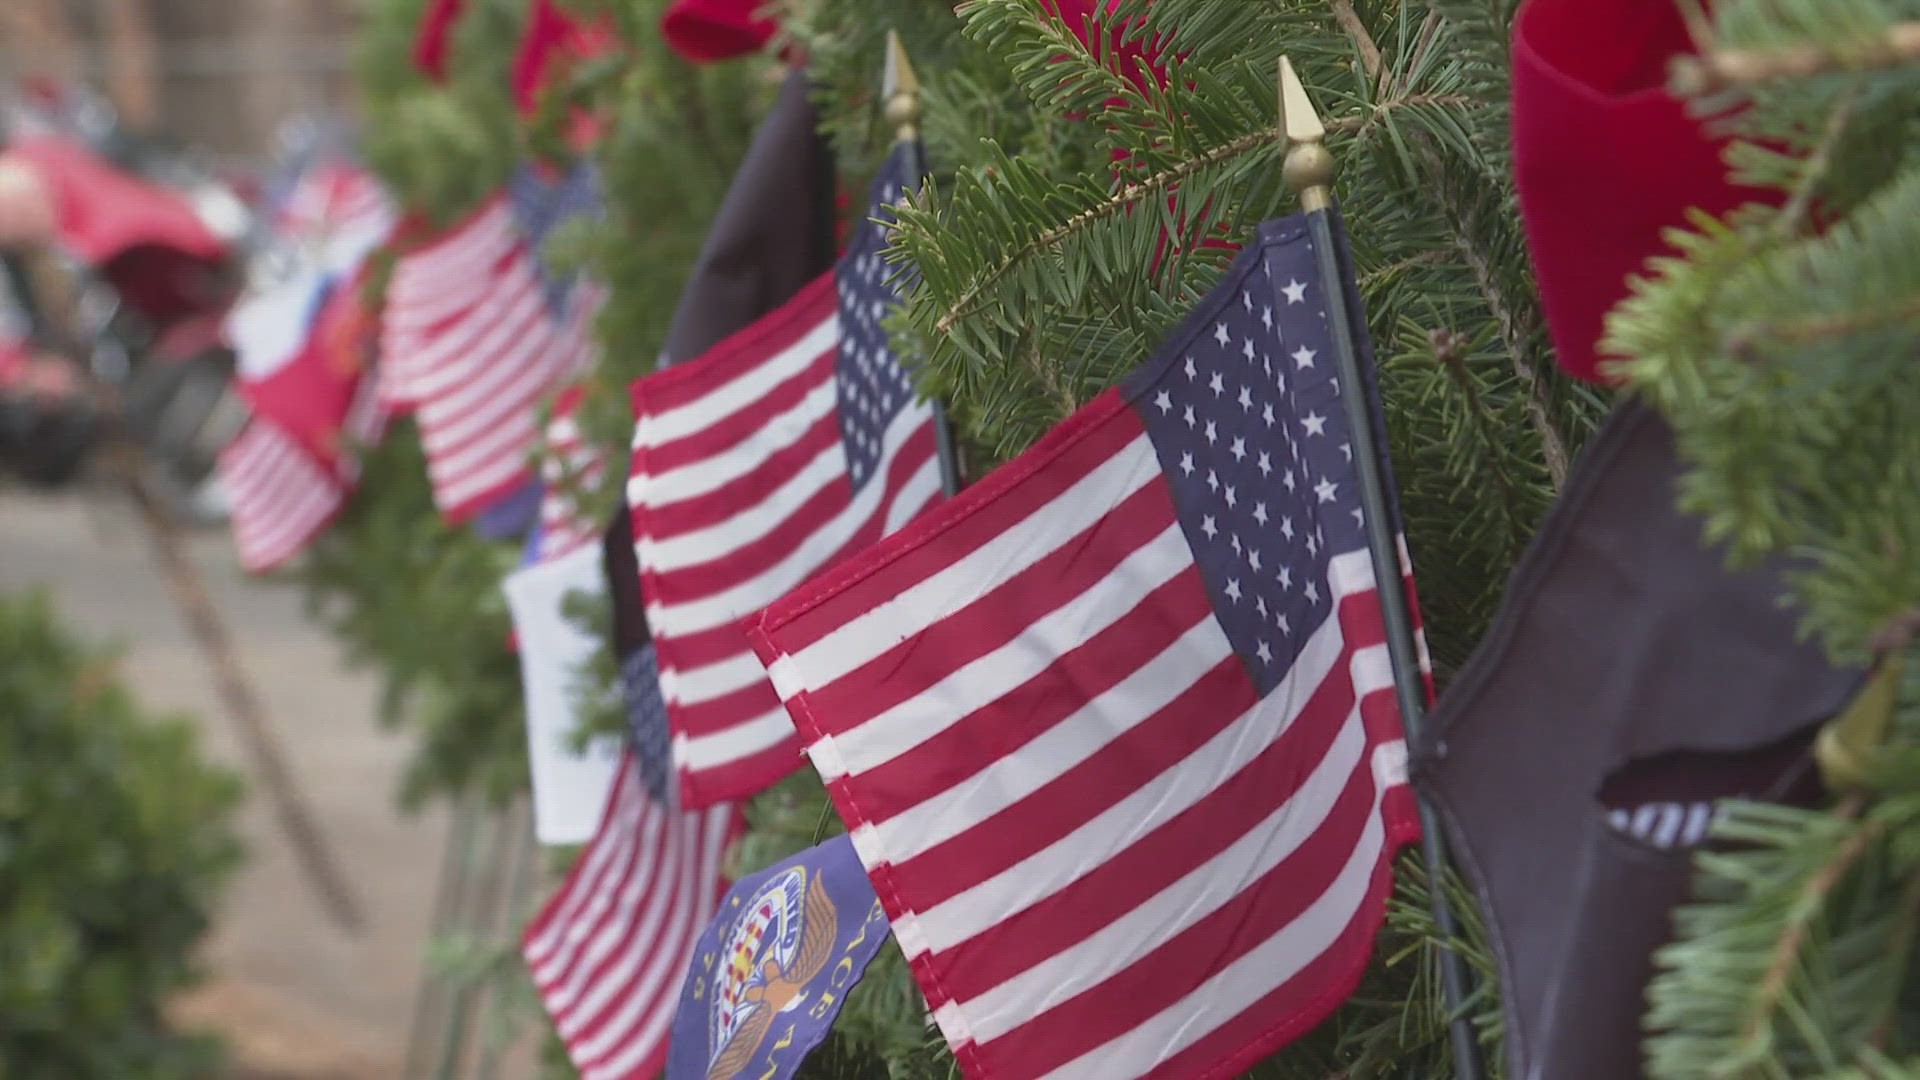 For the 11th year, the Greensboro chapter of Wreaths Across America will adorn more than 1,100 veterans' graves at Forest Lawn Cemetery.